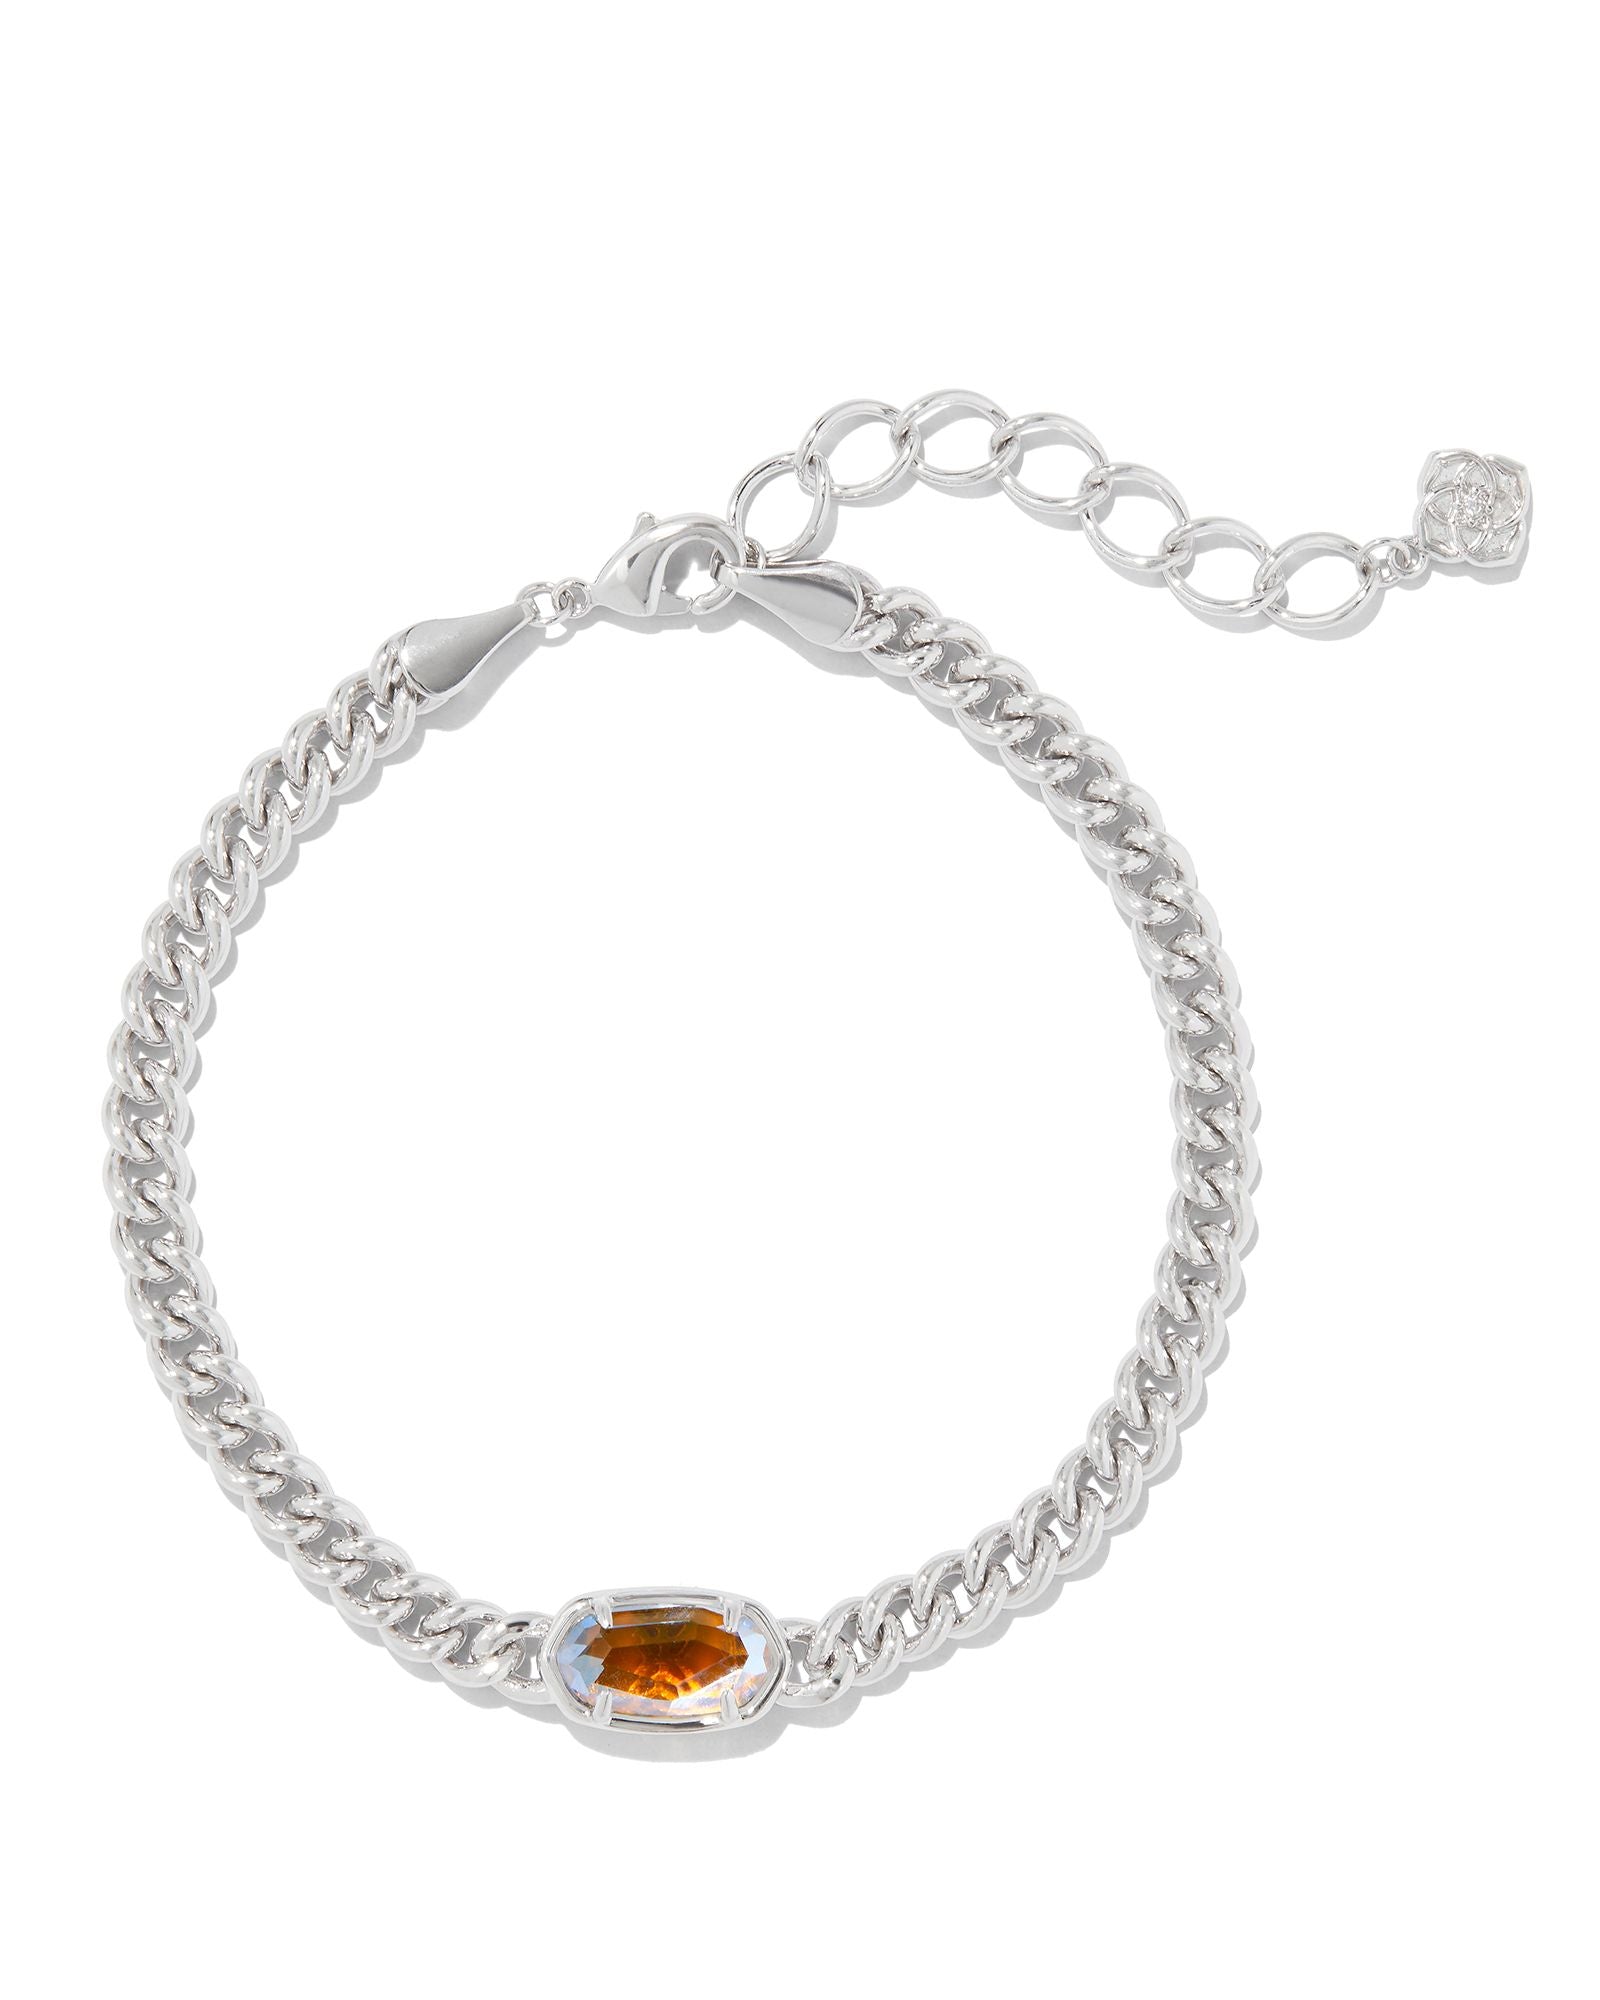 Grayson Delicate Link and Chain Bracelet Rhodium Dichroic Glass